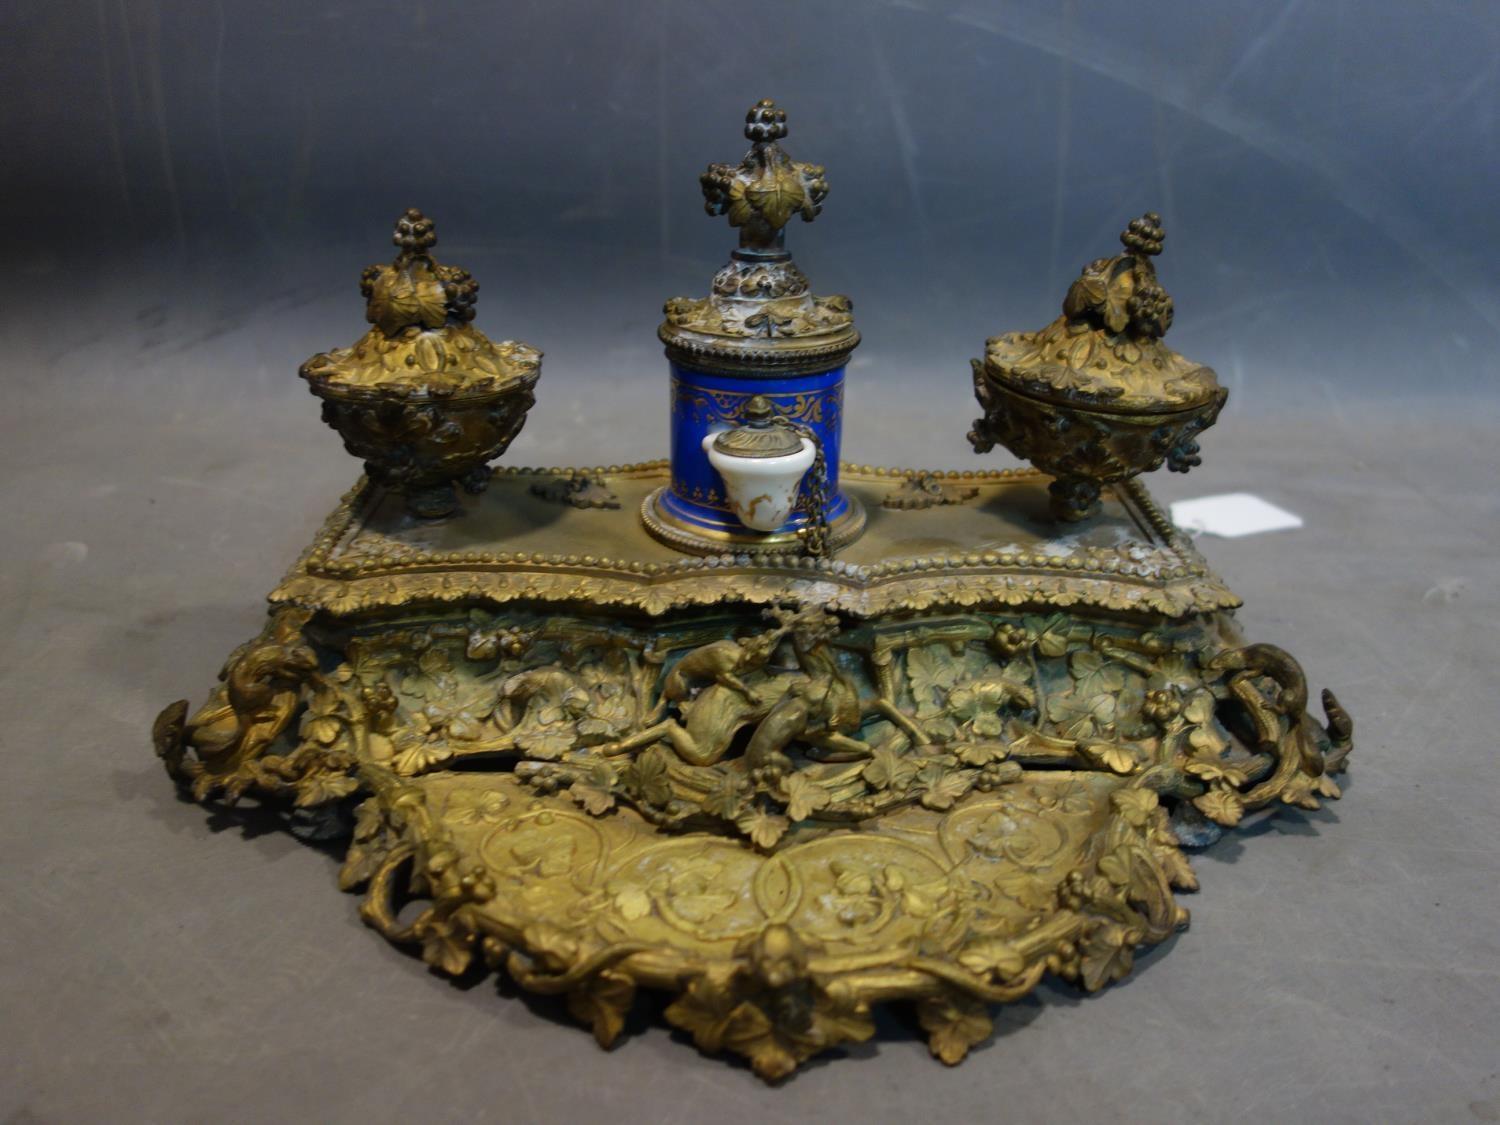 A 19th century French ormolu ink desk stand, with central porcelain pot and applied animals, H.20